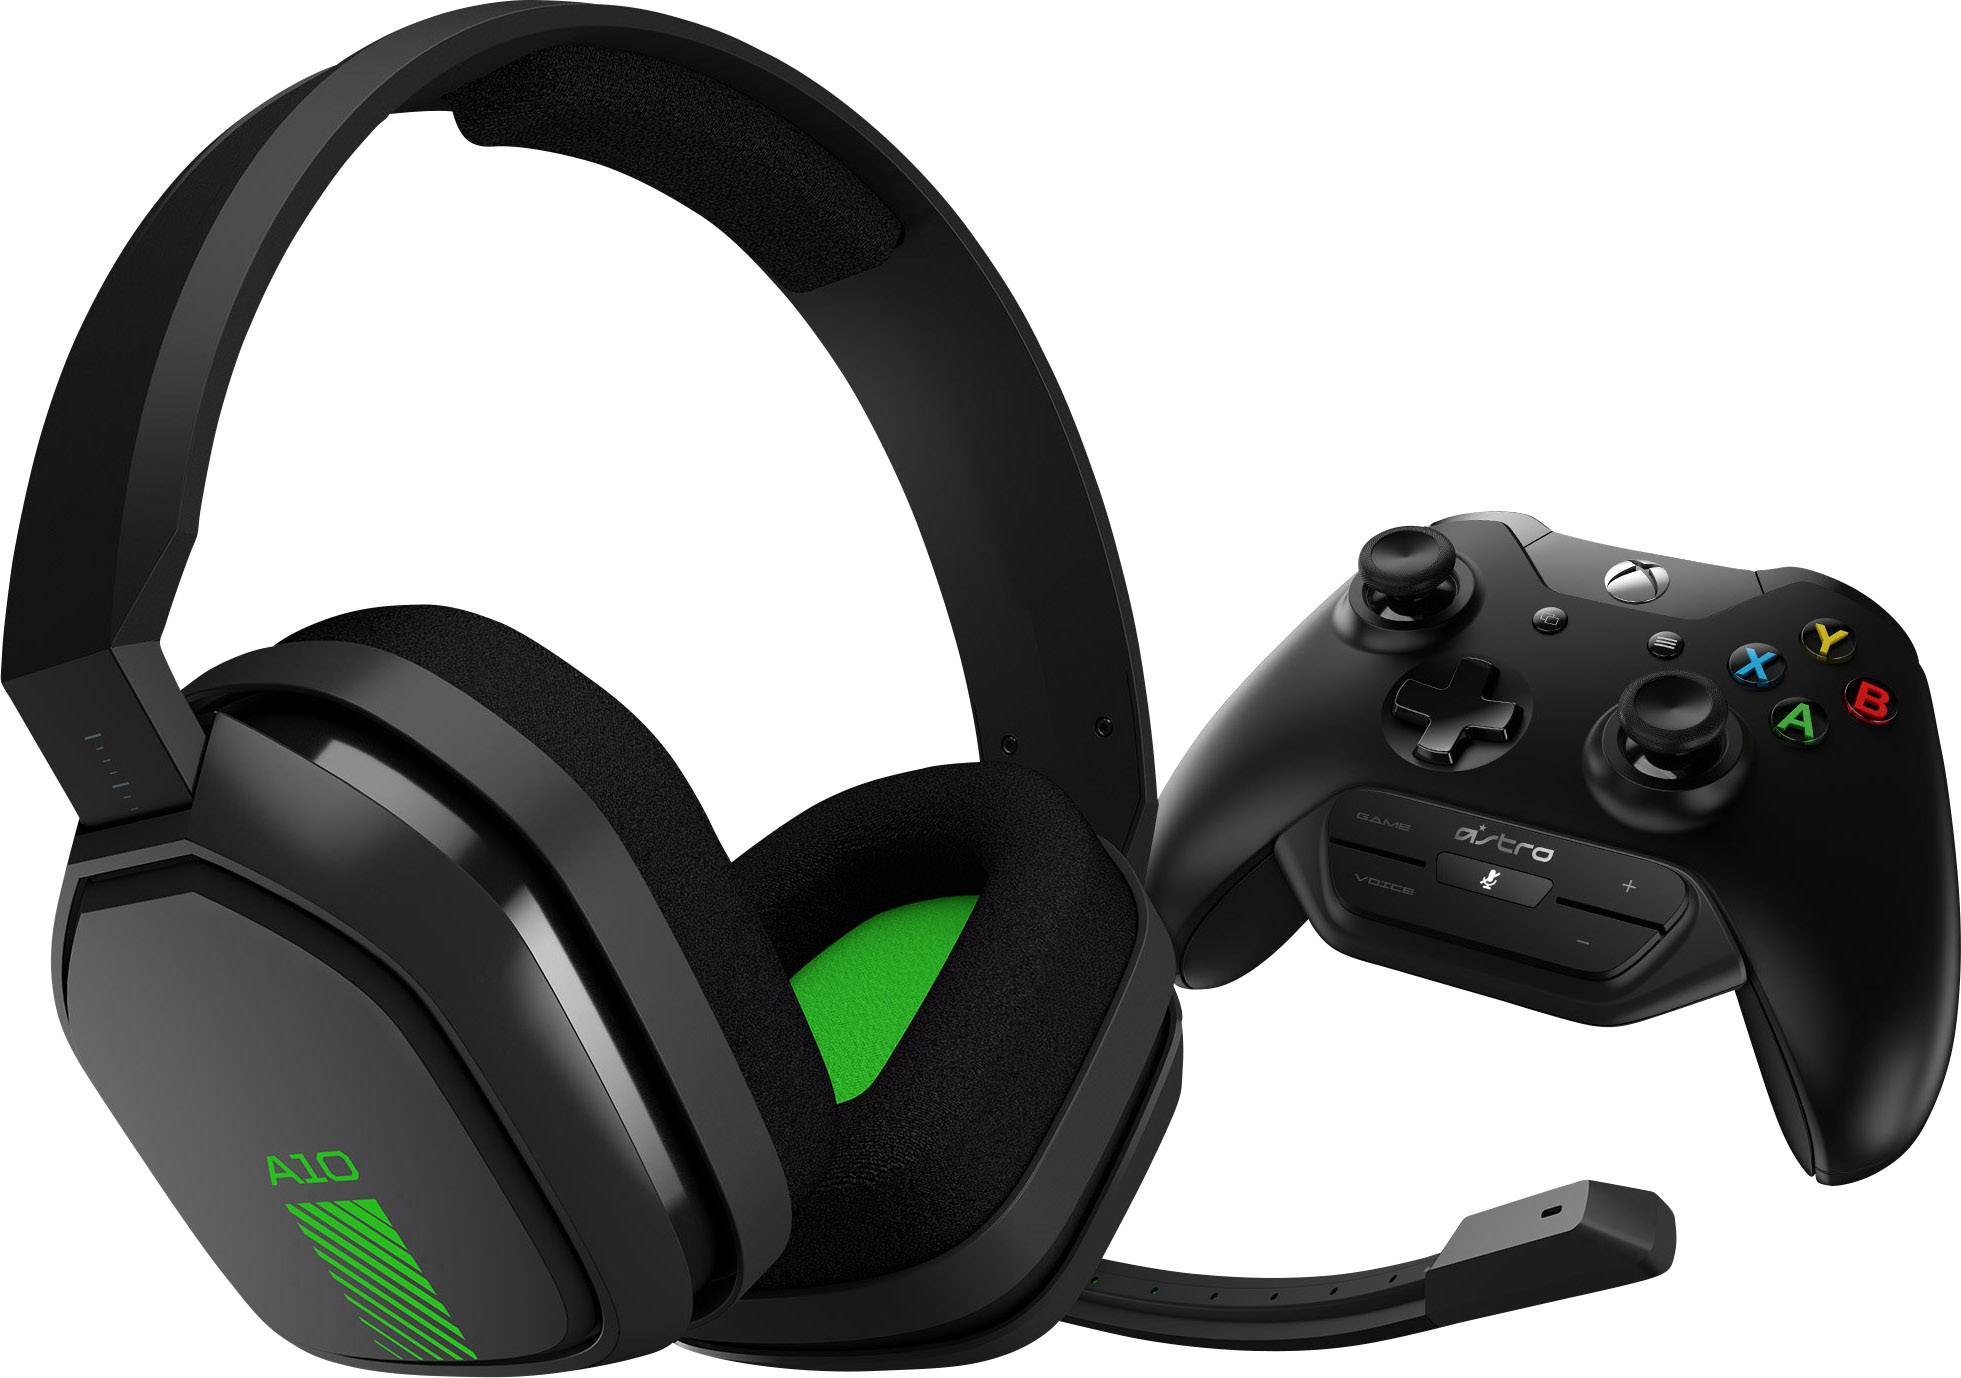 new astro gaming headset 2020